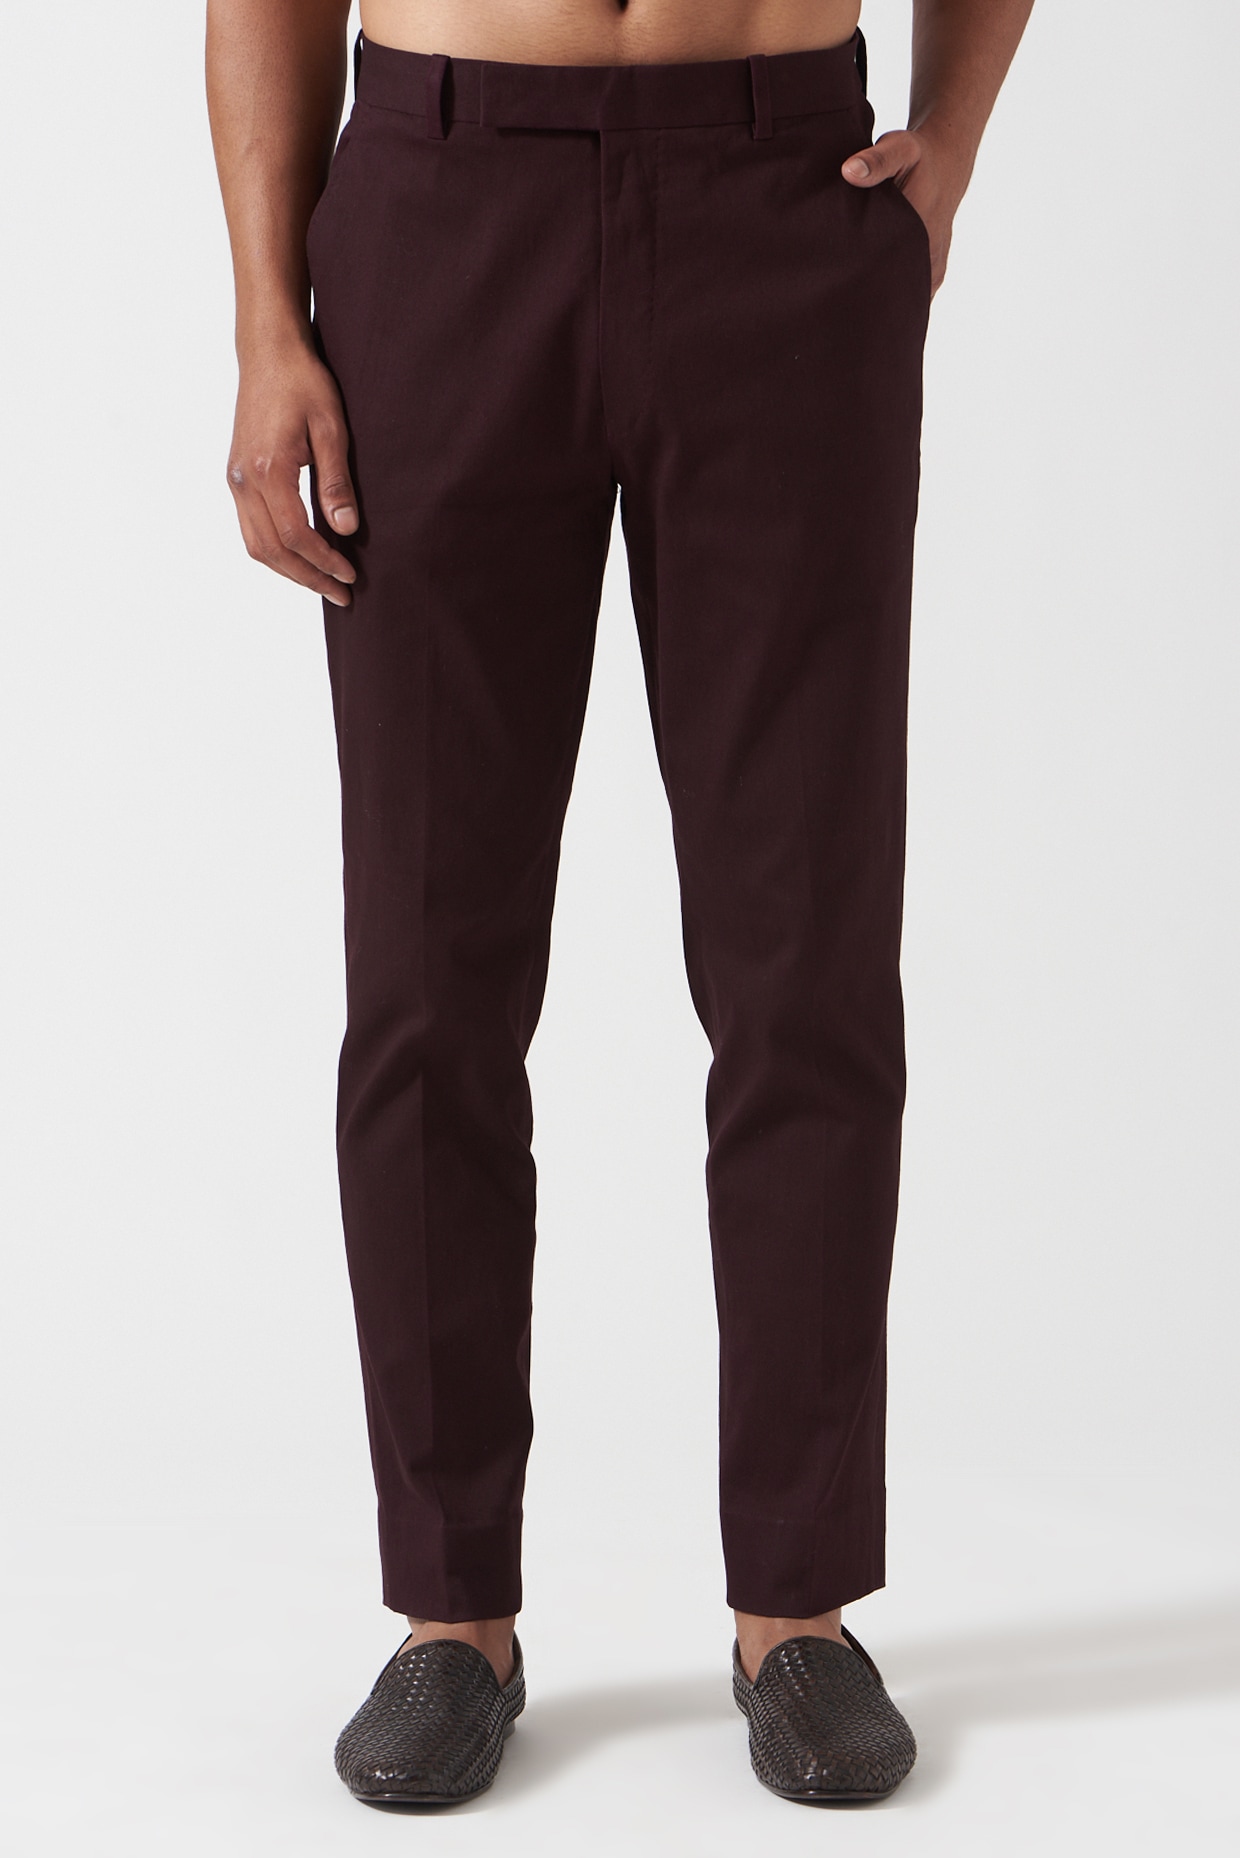 Coloured Chinos For Men | Men Chino Pants By Paul Brown